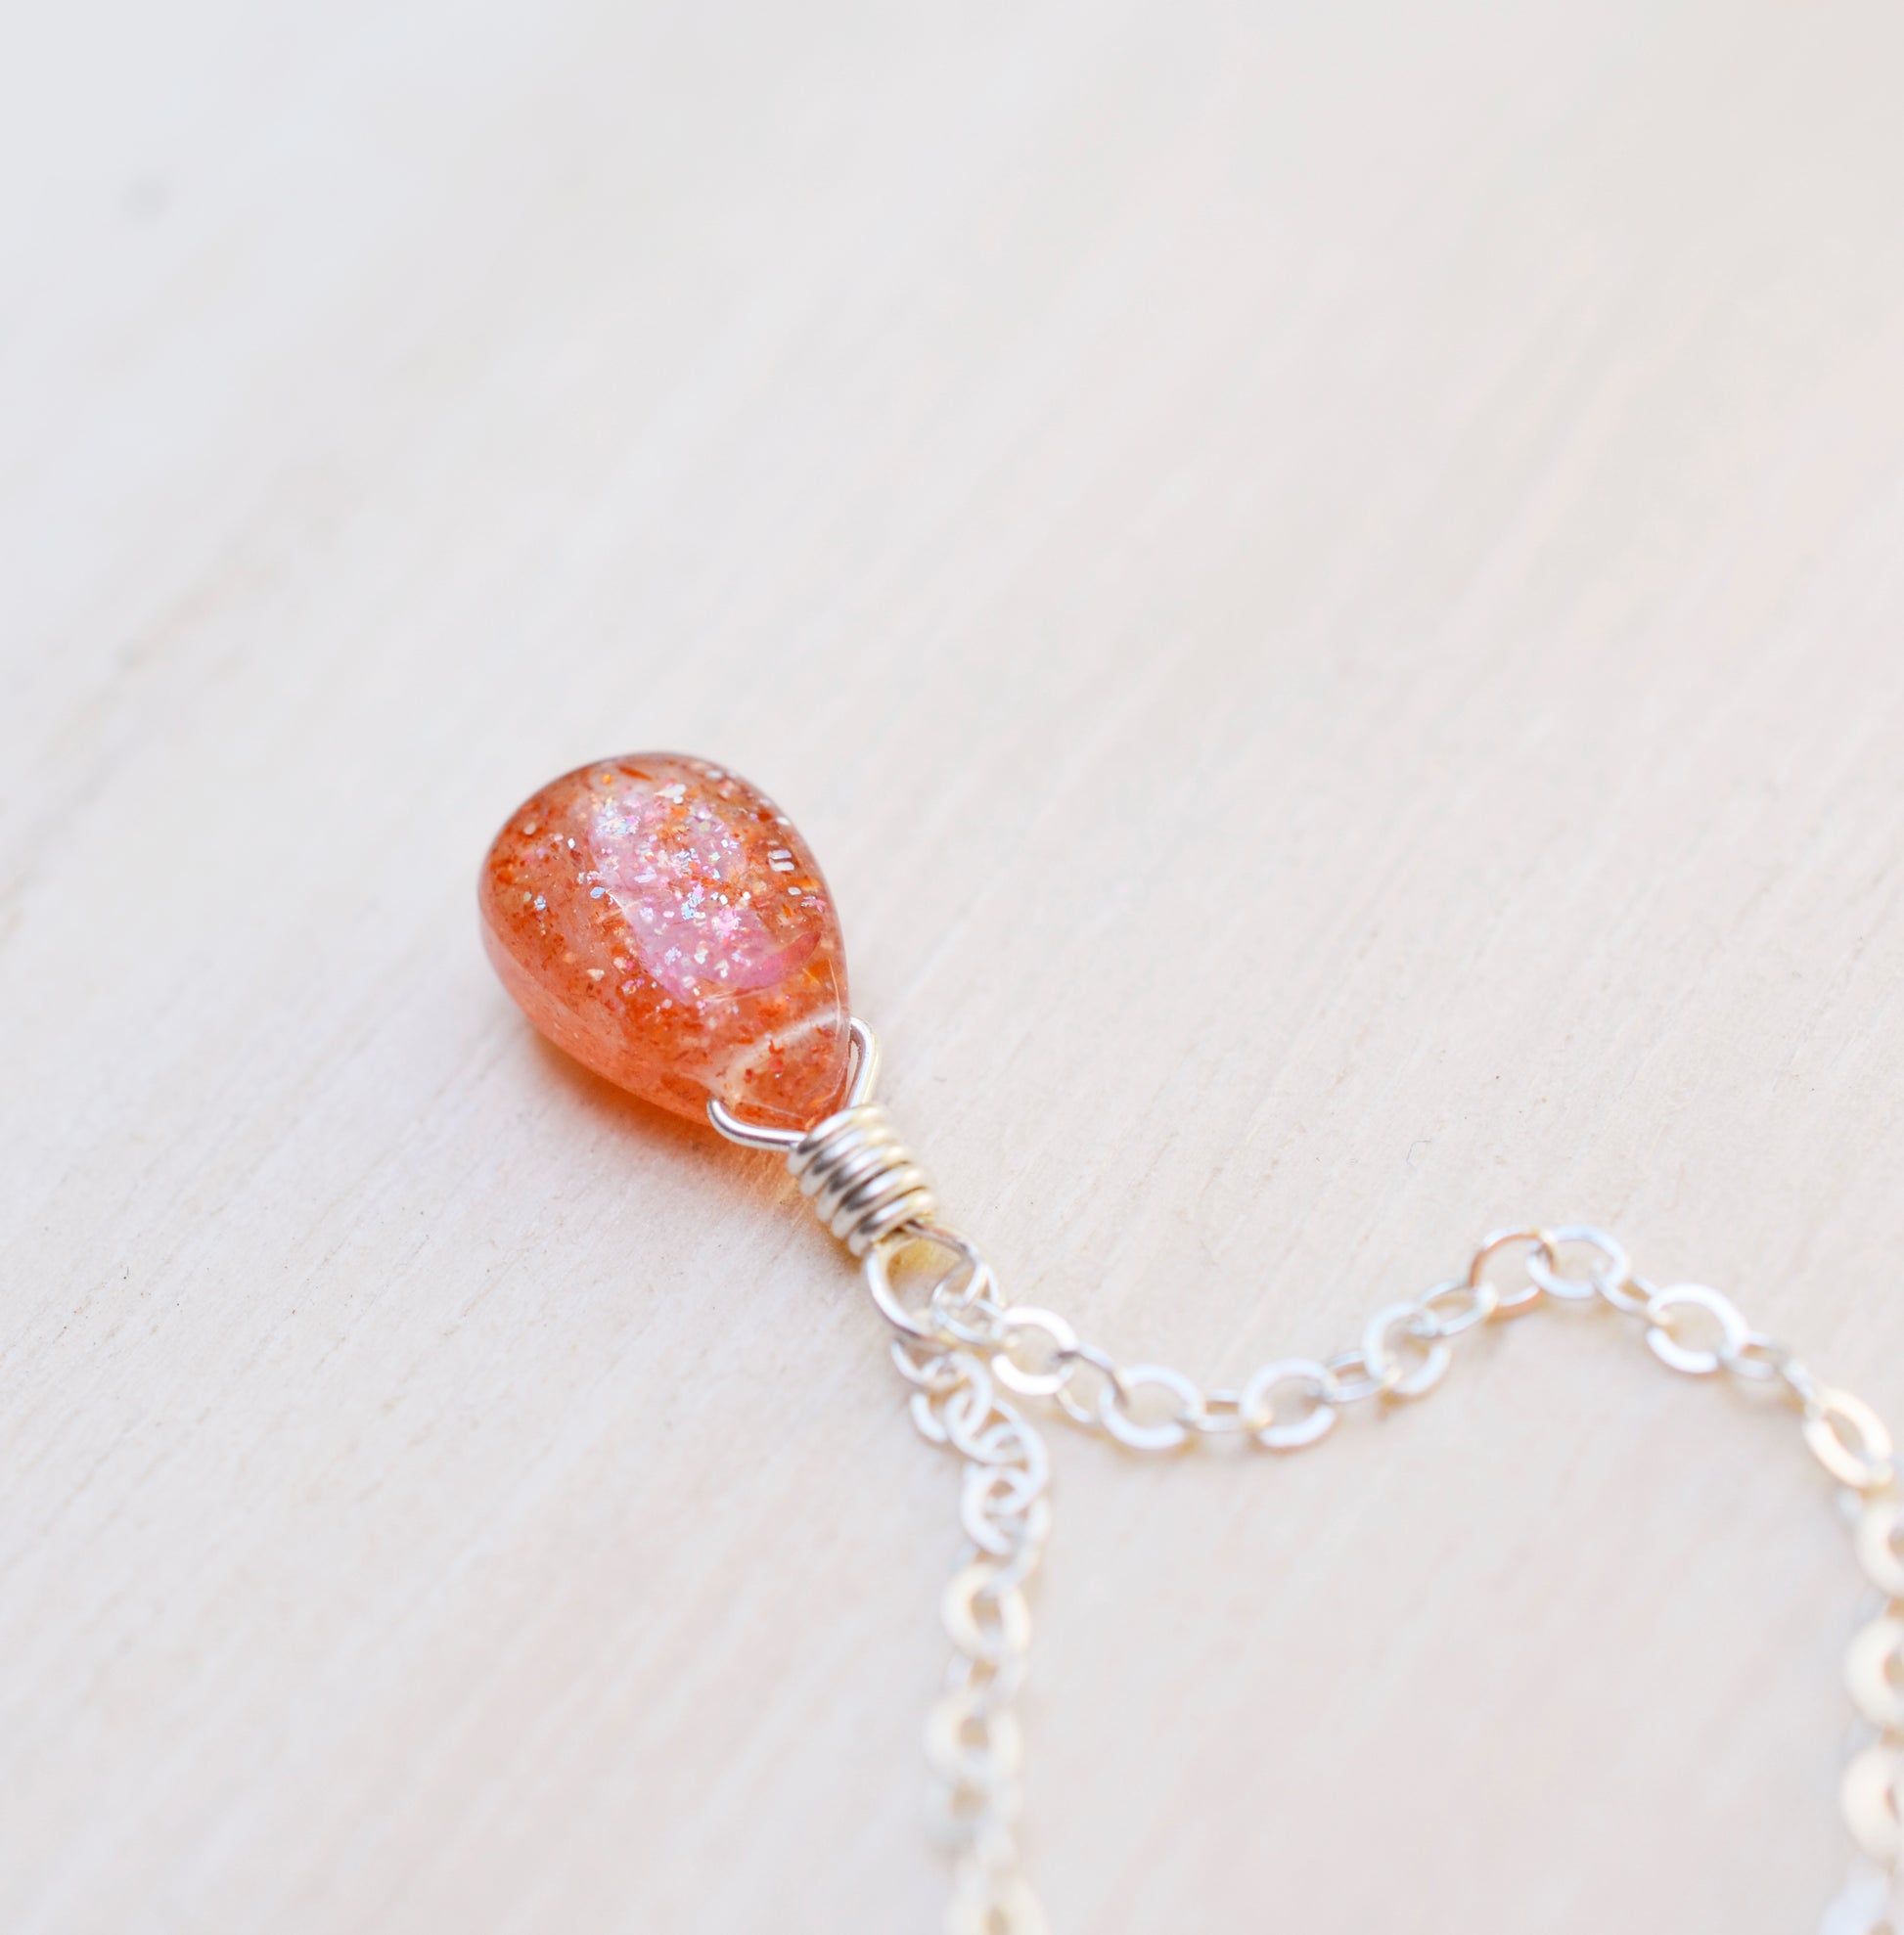 Orange Sunstone smooth polished teardrop pendant on a sterling silver chain.